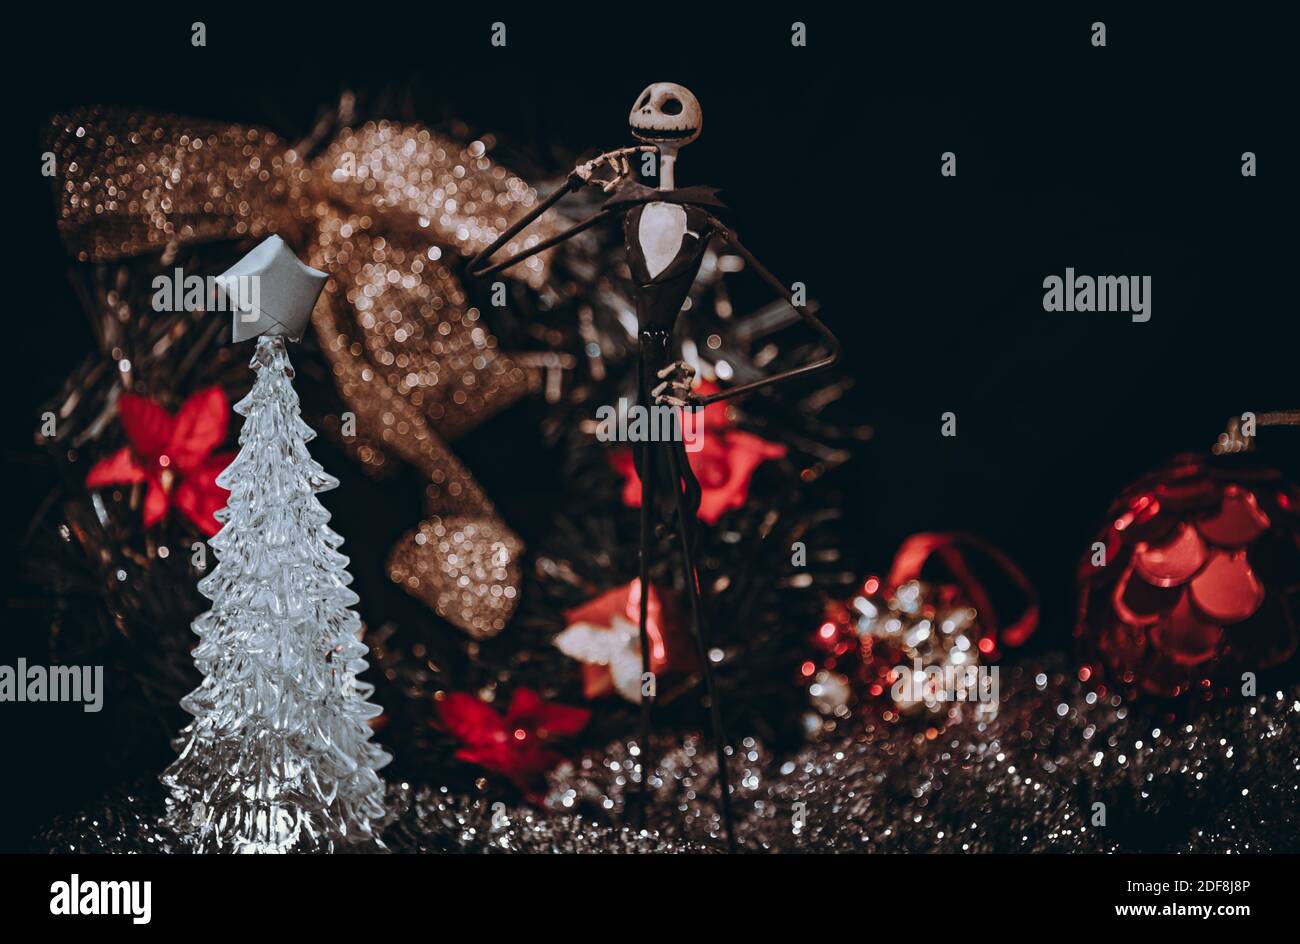 Charming Jack Skellington from Night Before Christmas surrounded by festive adornments Stock Photo